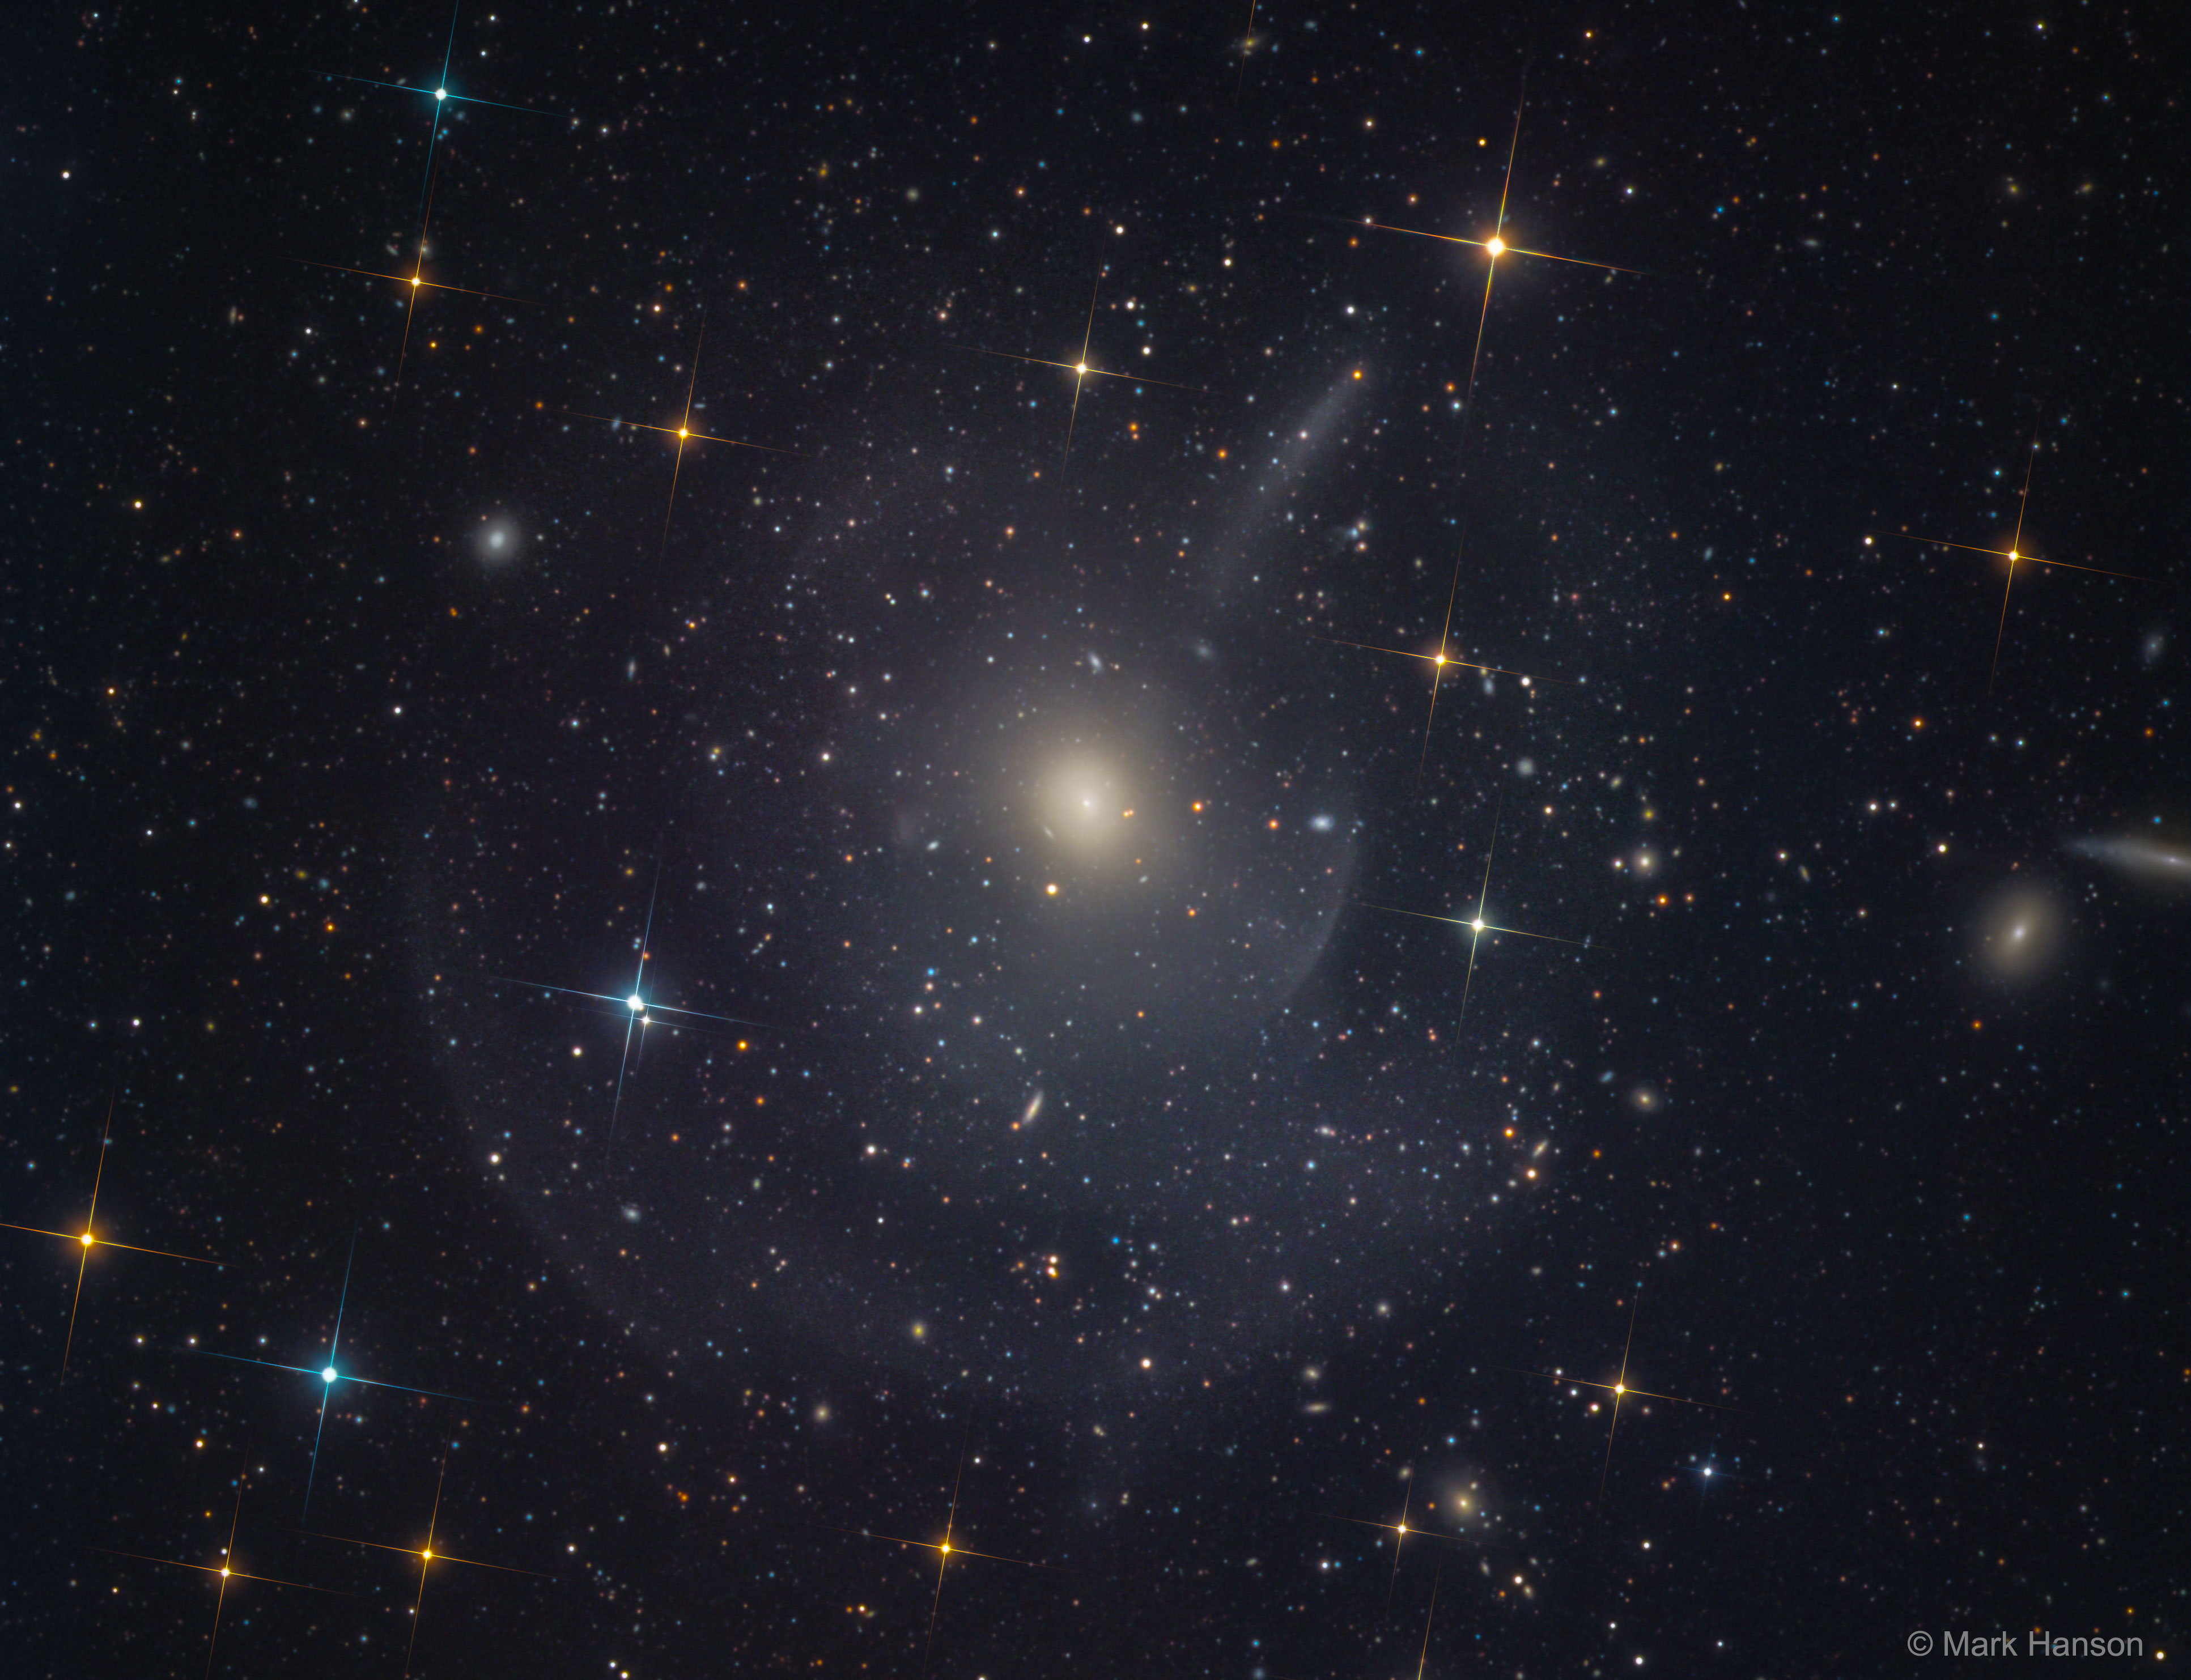 Astronomy Picture of the Day - Σελίδα 8 M89_hanson_3866